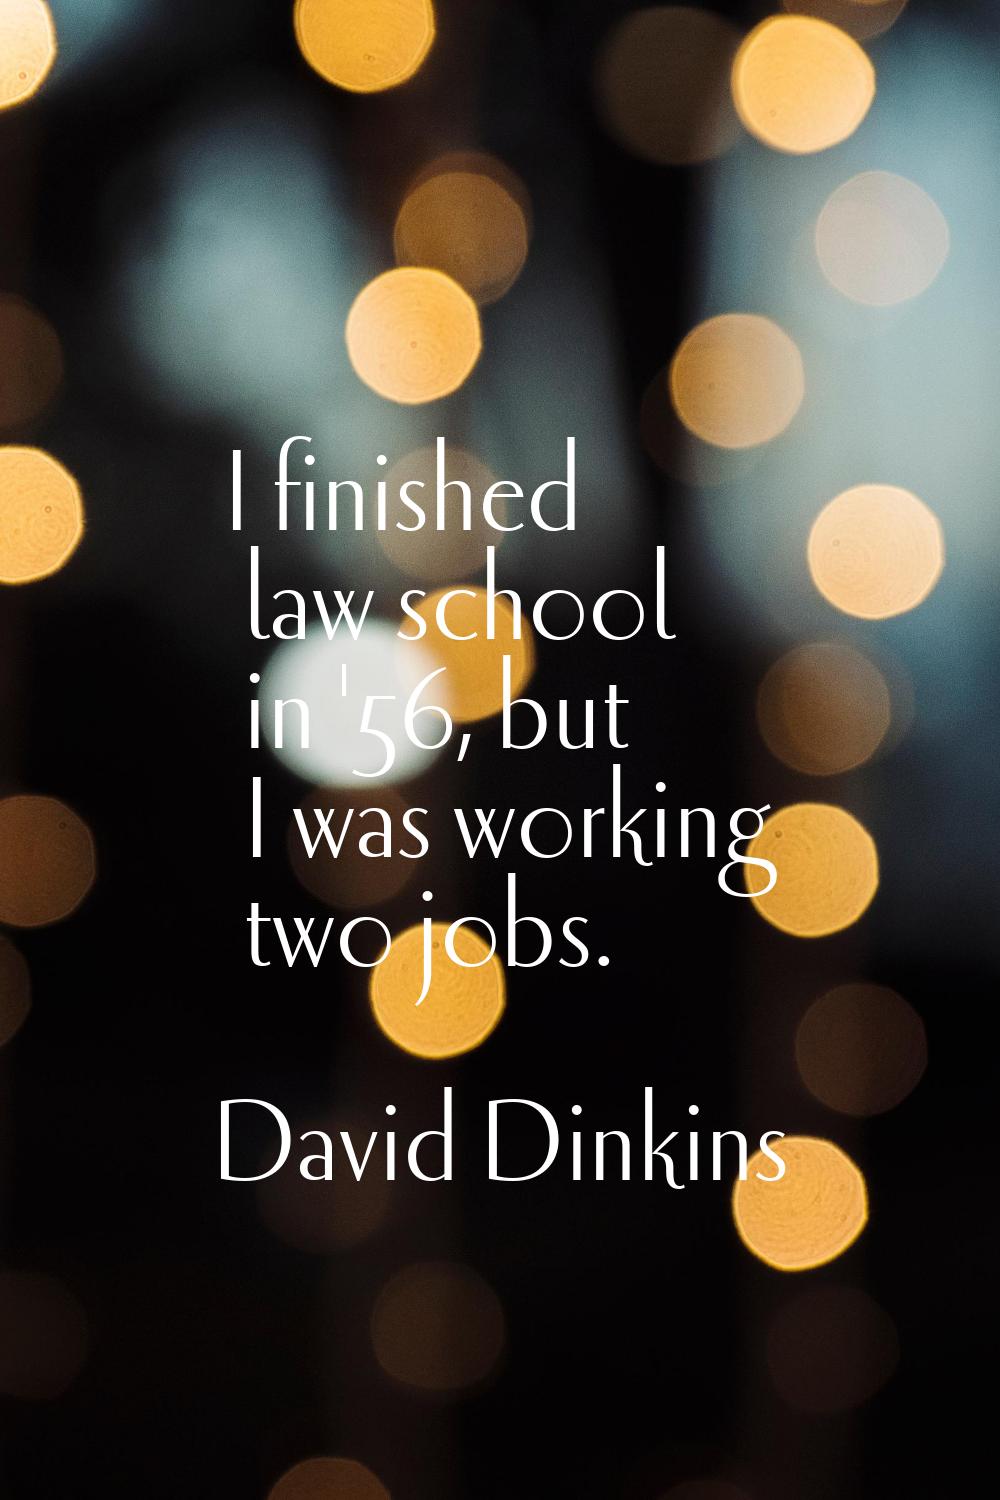 I finished law school in '56, but I was working two jobs.